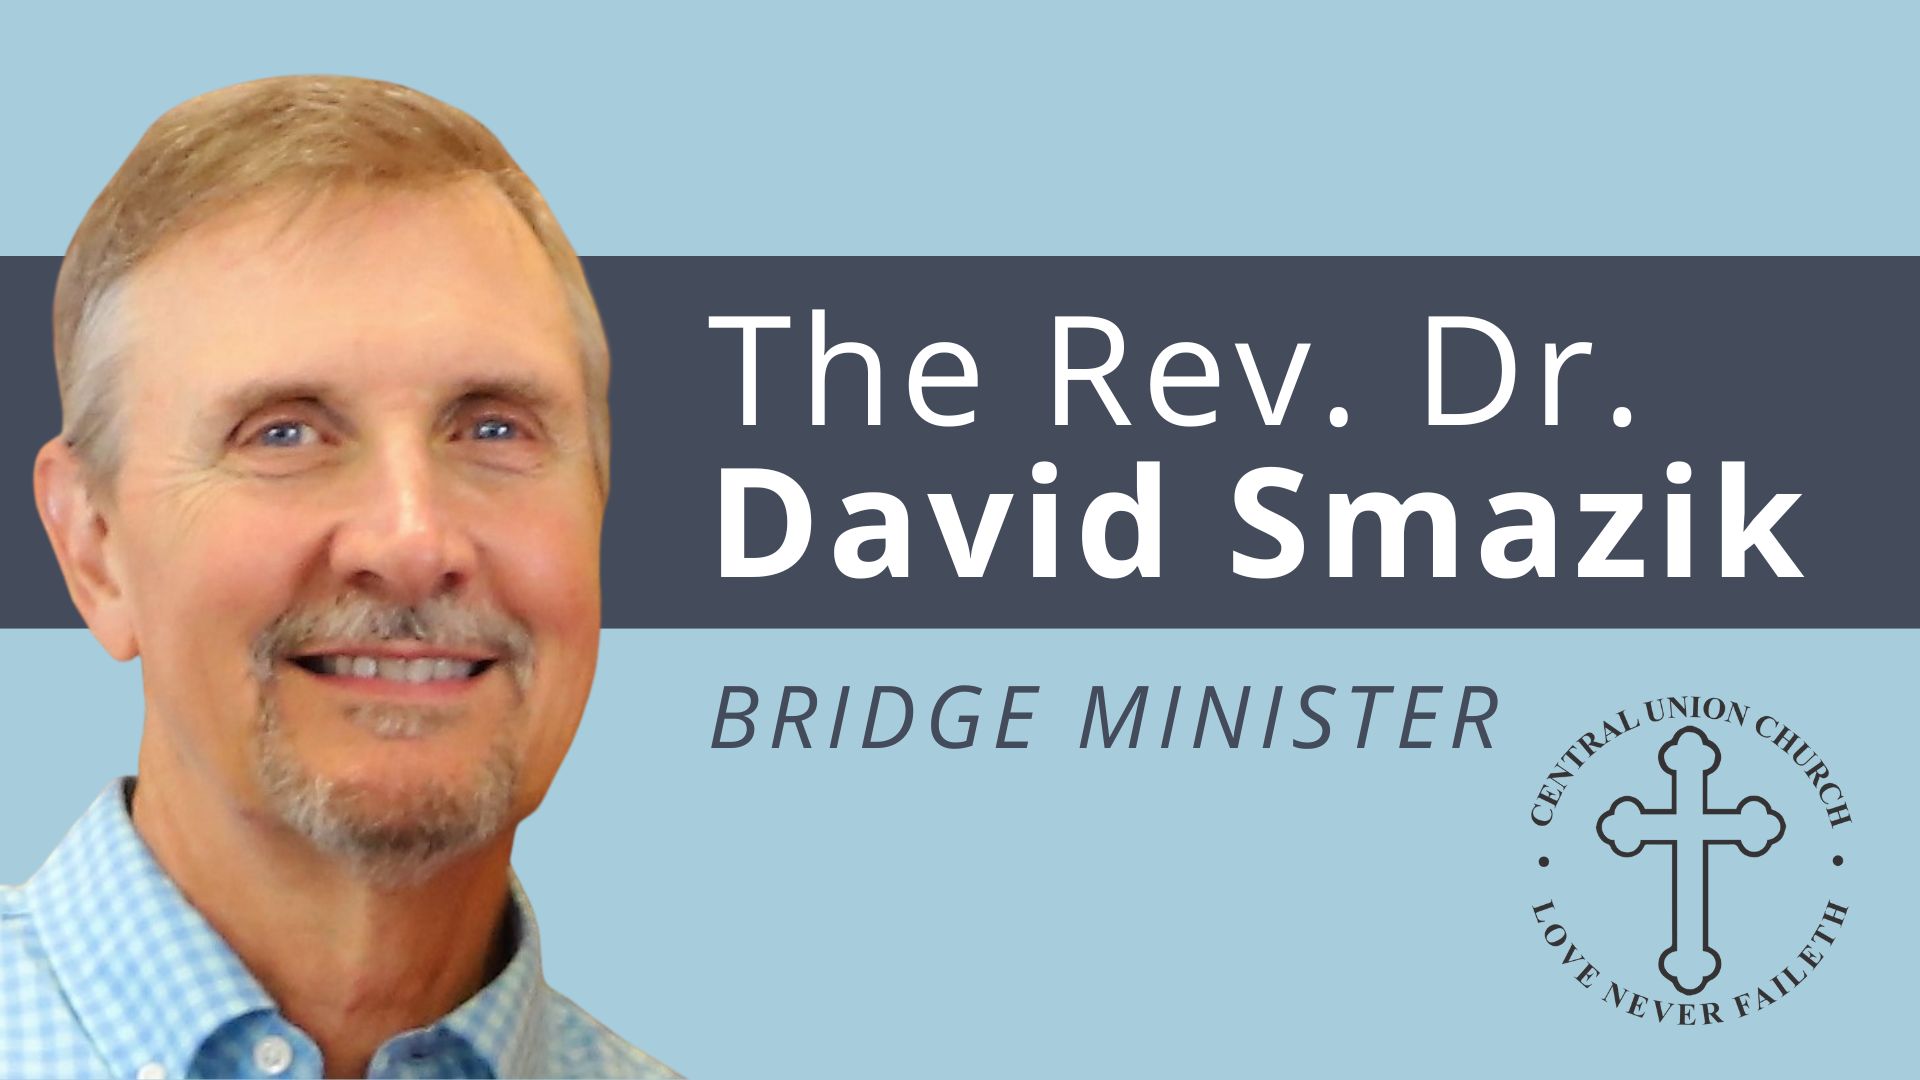 Headshot of Pastor Dave. Text reads The Reverend Doctor David Smazik bridge minister with Central Union logo